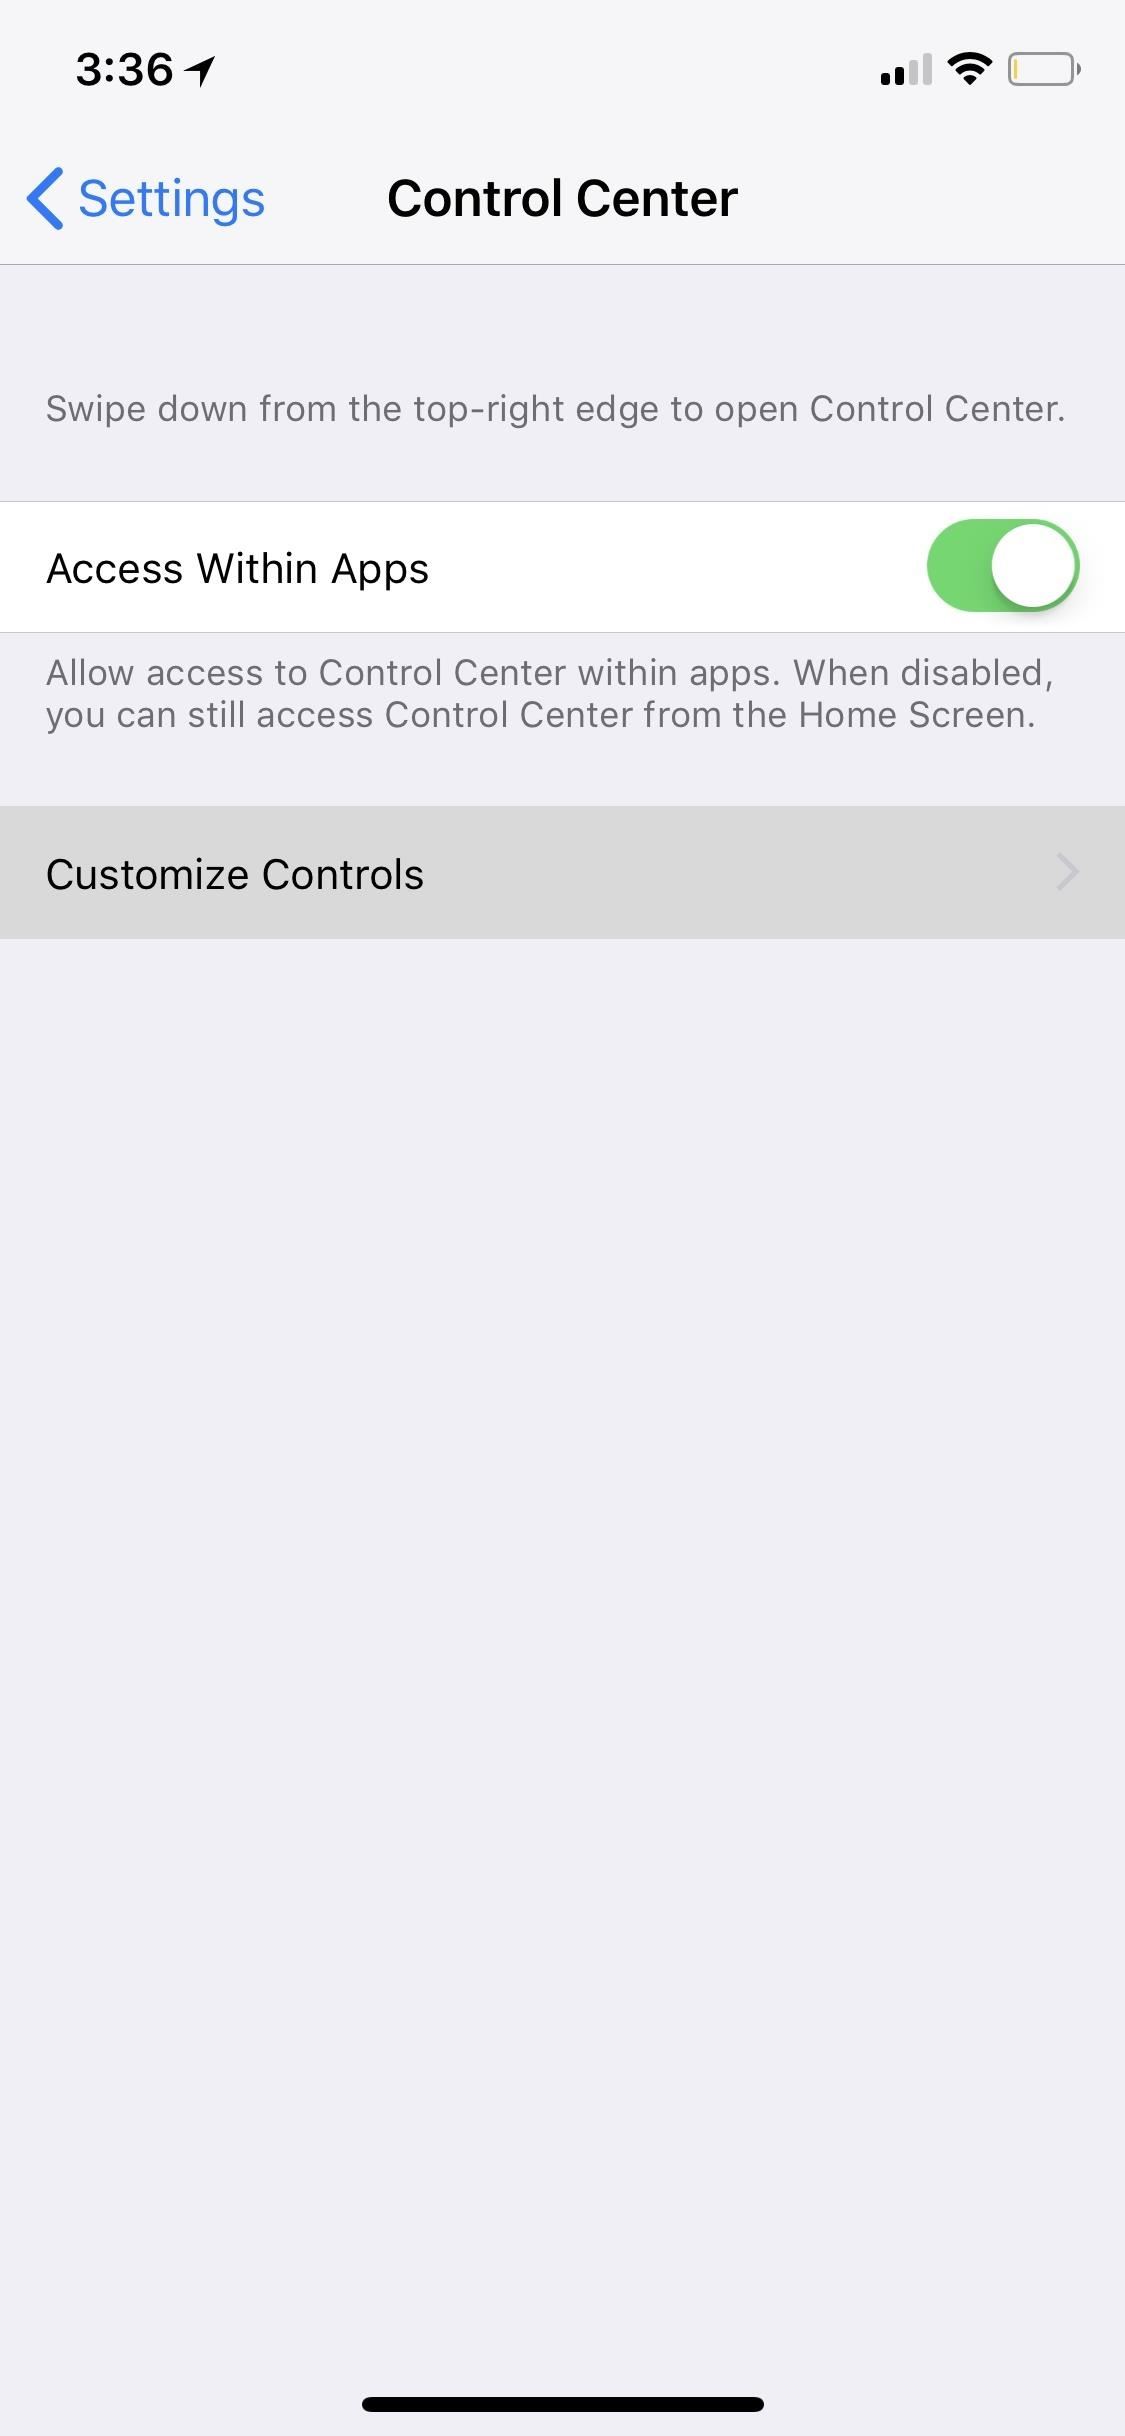 How to Turn Off 'Low Power Mode' on Your iPhone to Speed Things Up Again